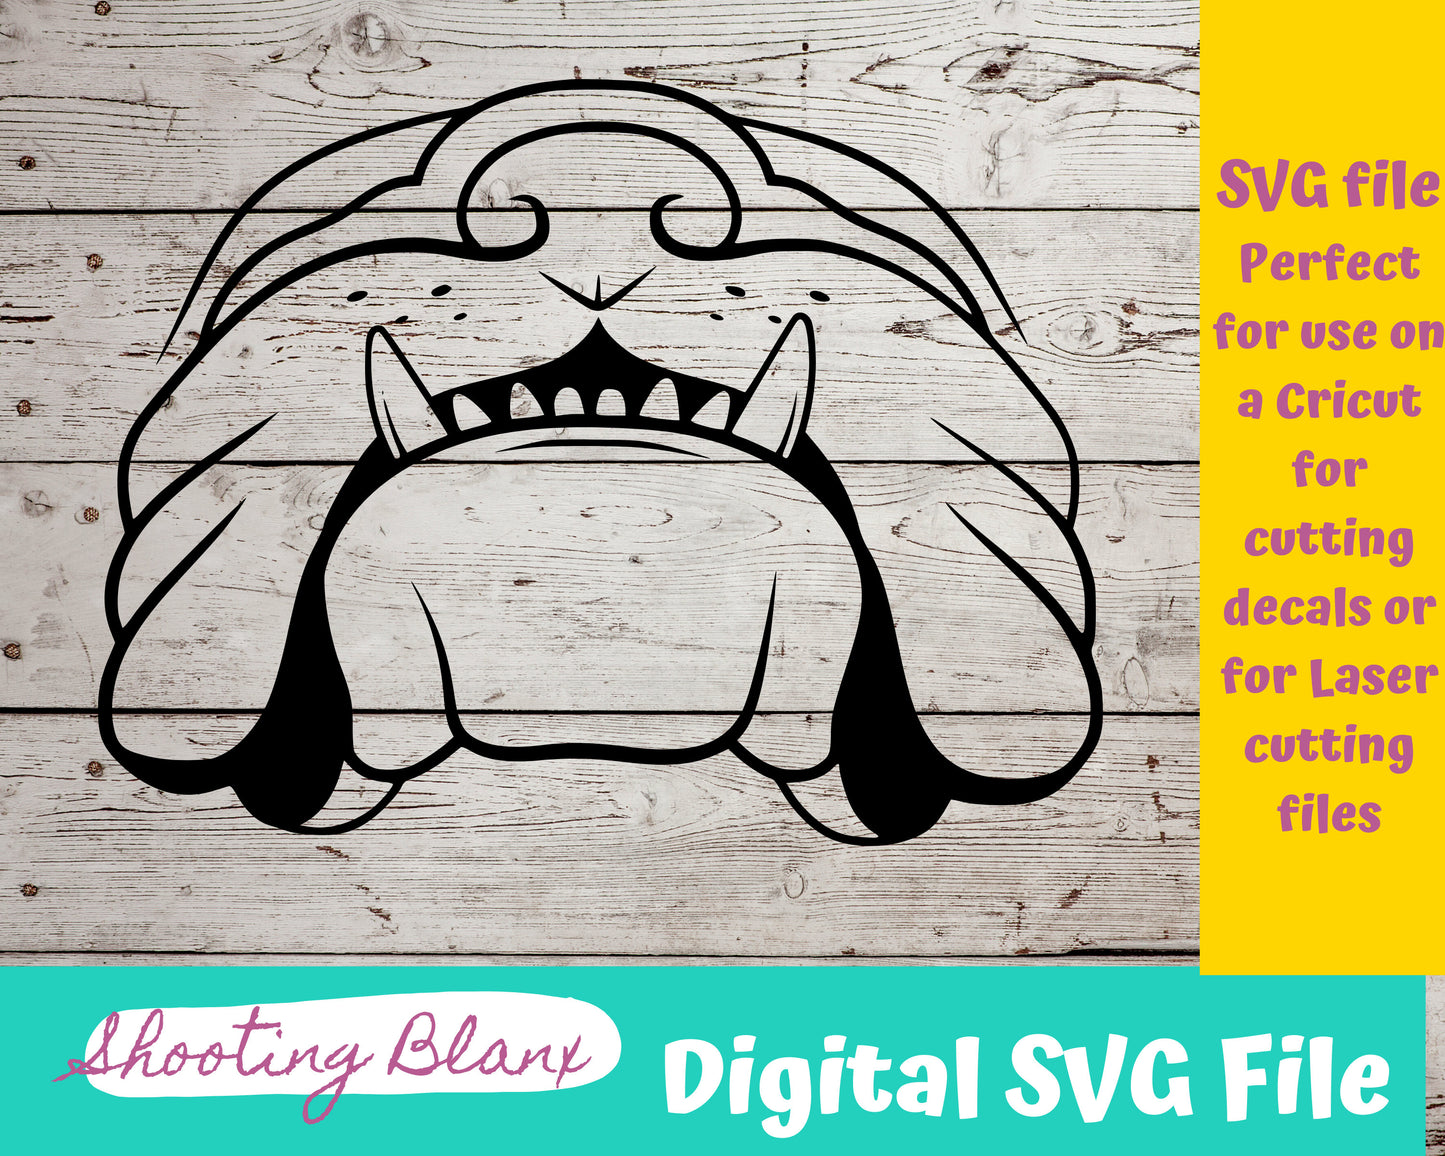 Bull Dog  Mouth SVG file perfect for Cricut, Cameo, or Silhouette also for laser engraving Glowforge, half face, mask, sublimation